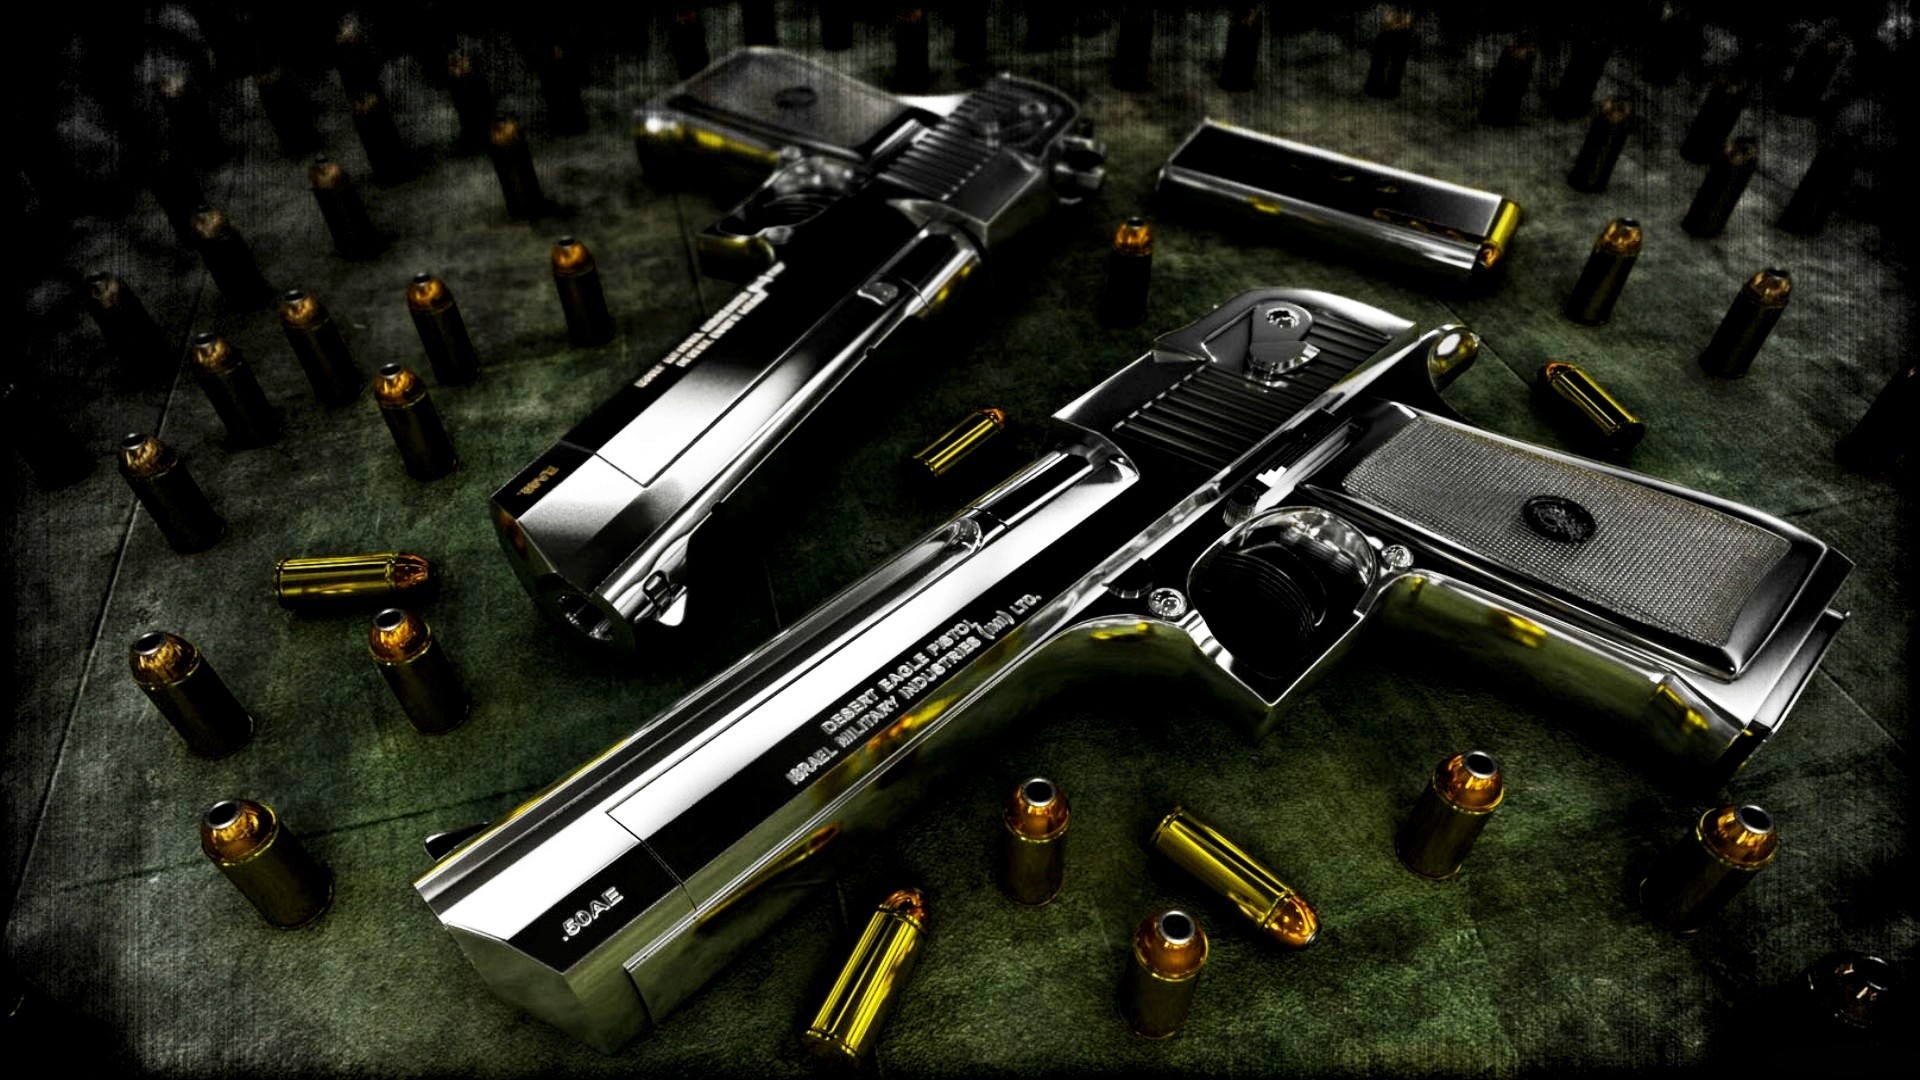 1920x1080 Pistol Wallpapers, Top on NMgnCP.com